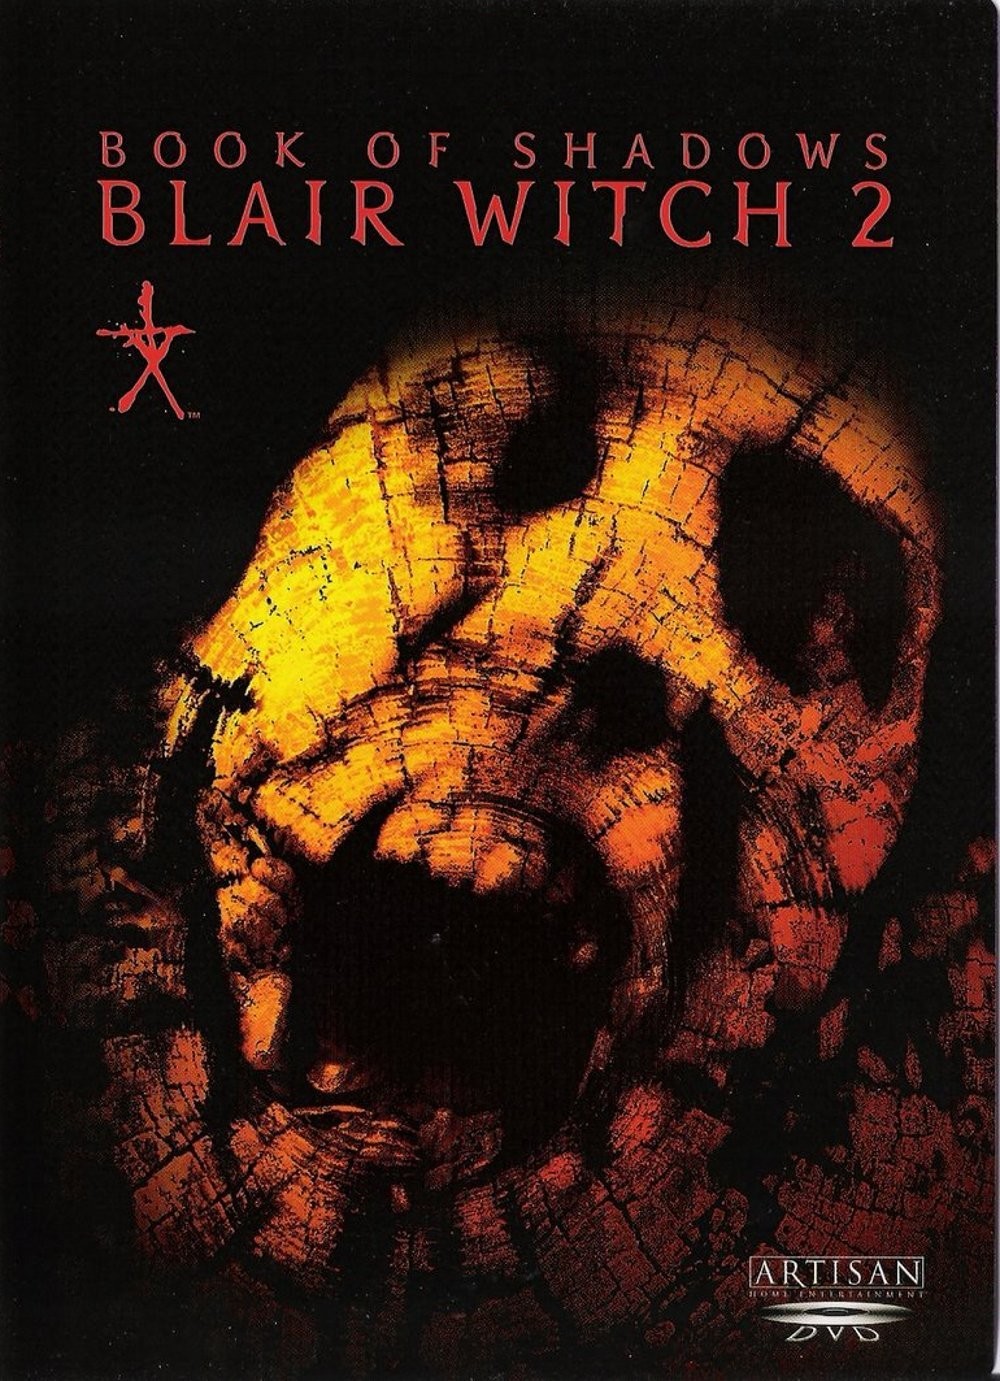 blair witch book of shadows download free